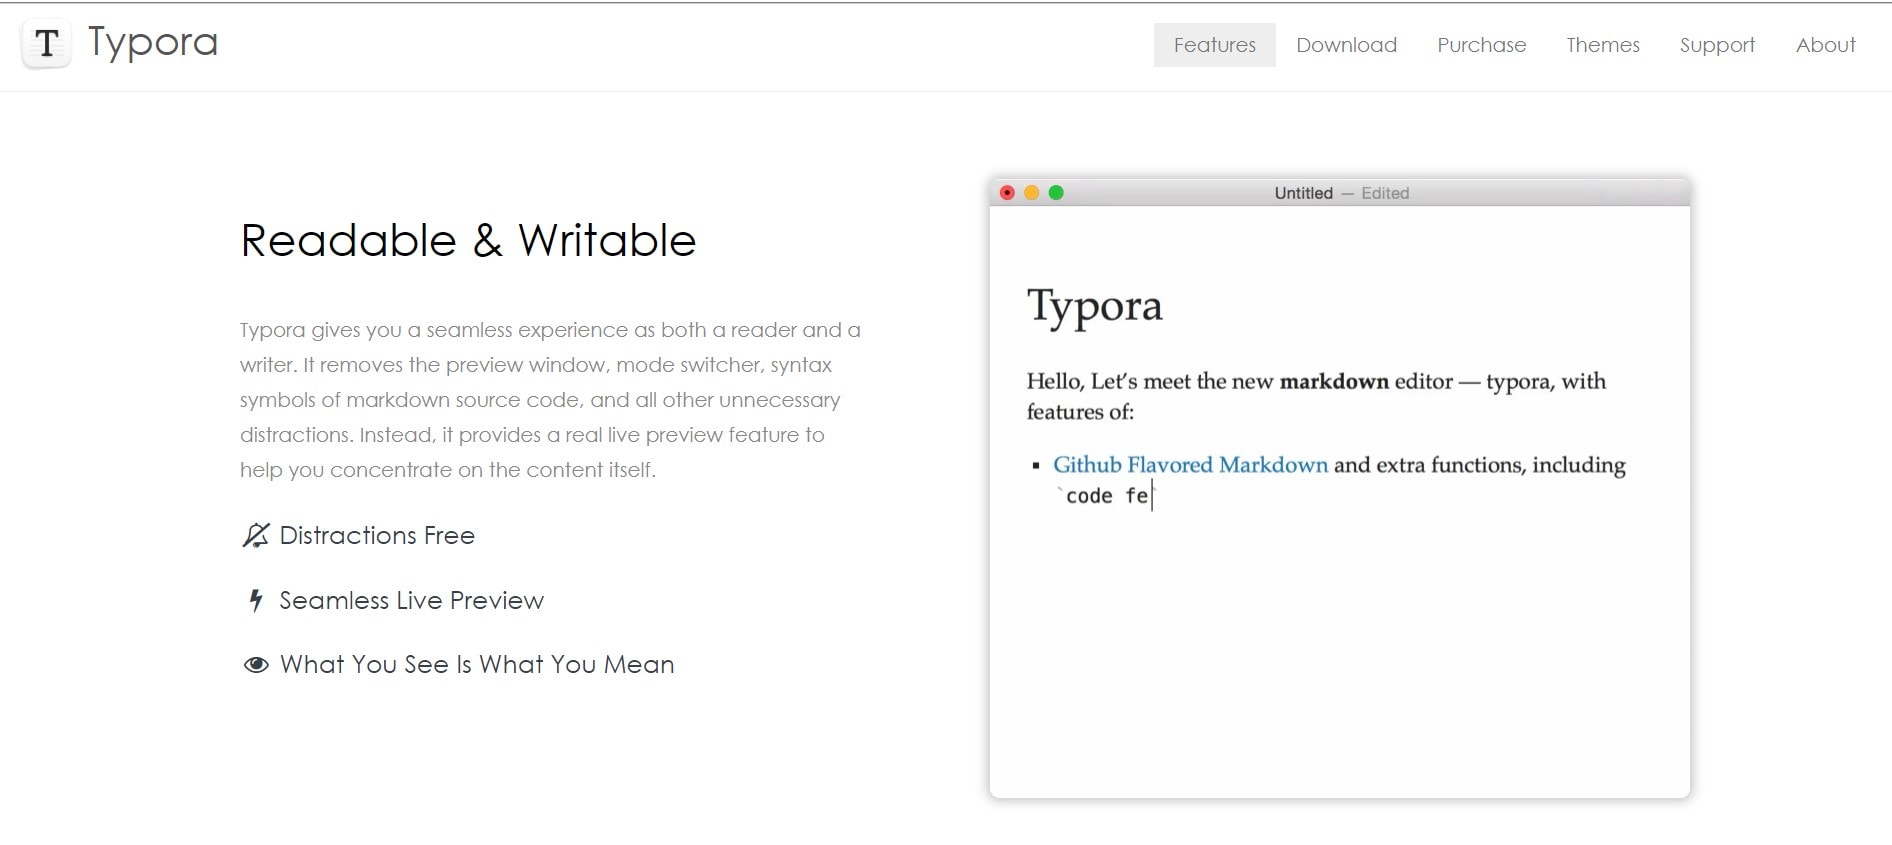 Typora Markdown Editor allows for simultaneous composition and formatting of a document.